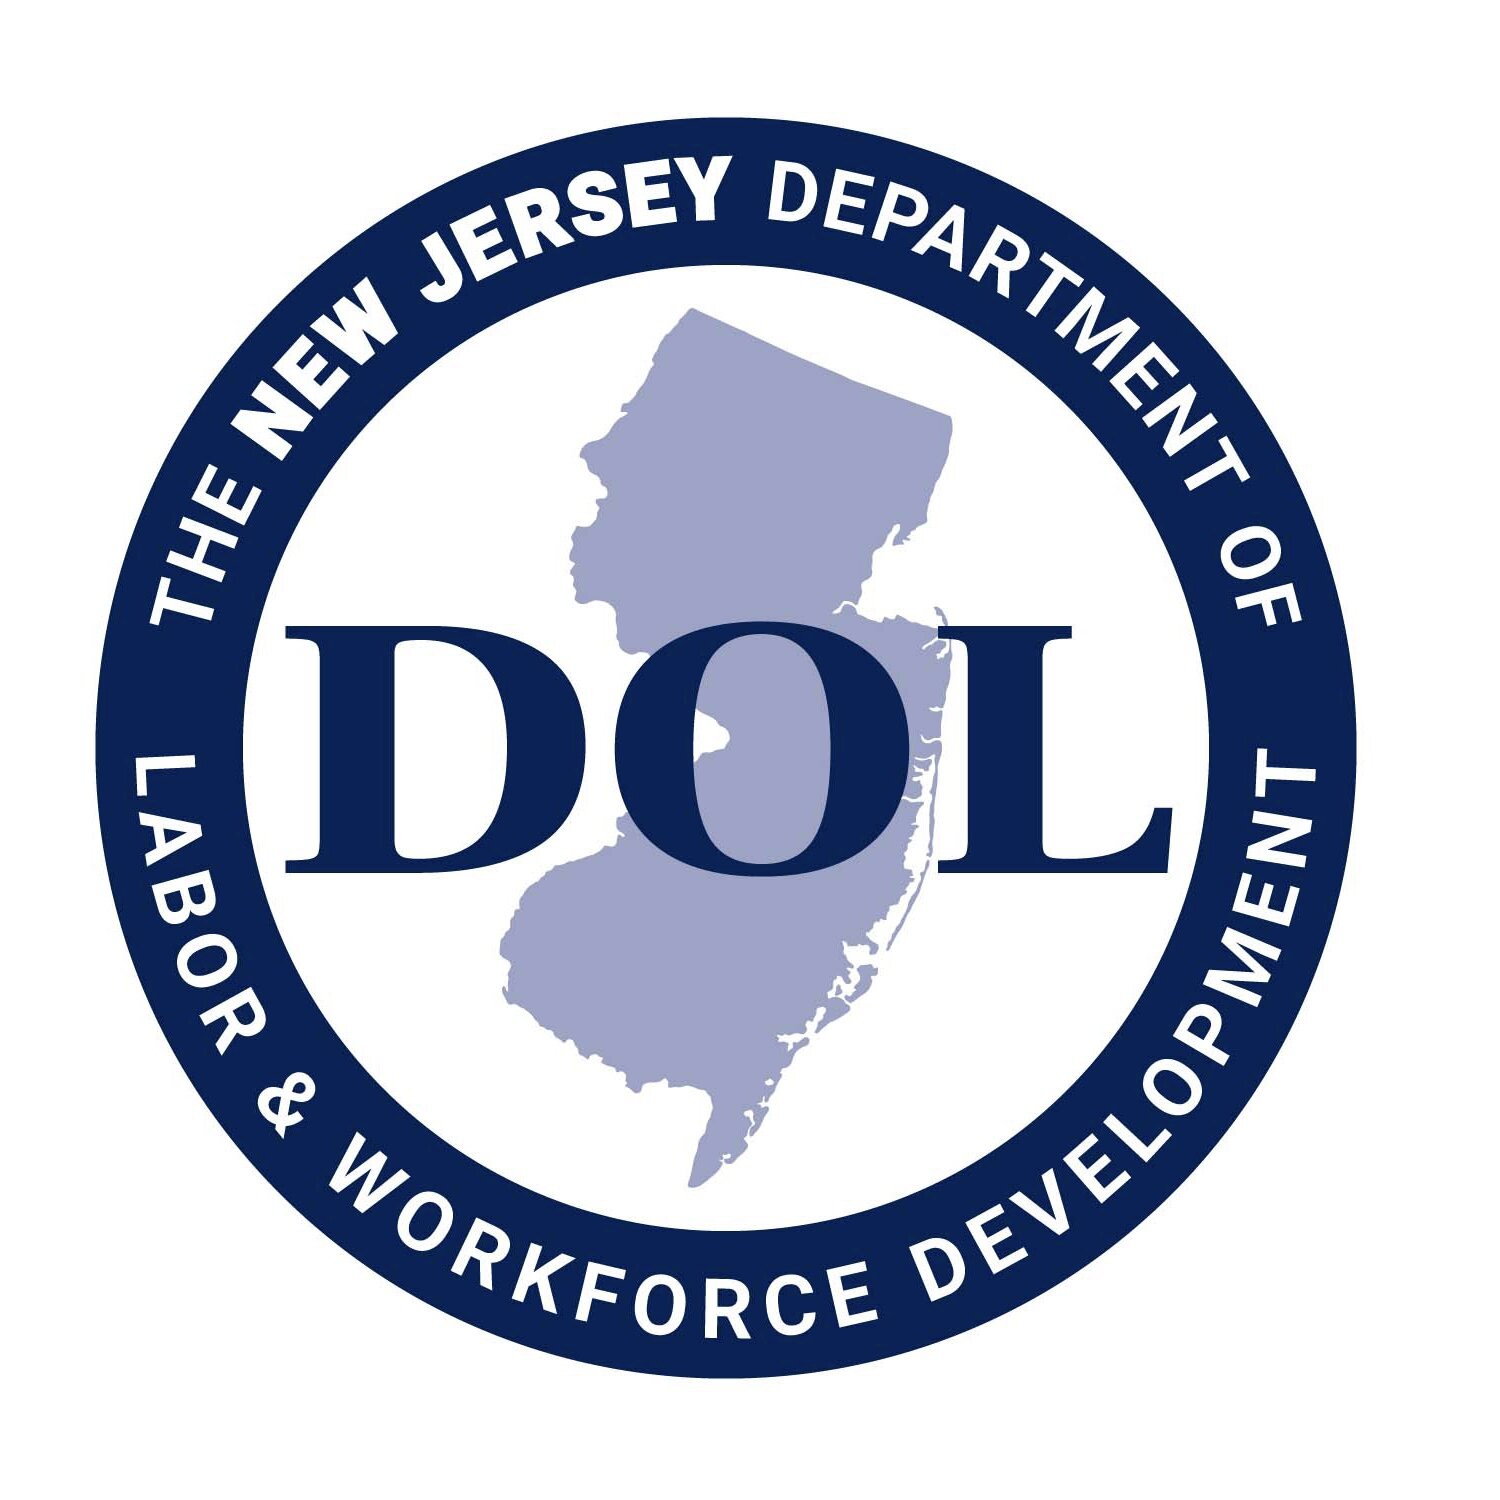 Funded through The New Jersey Department of Labor and Workforce Development